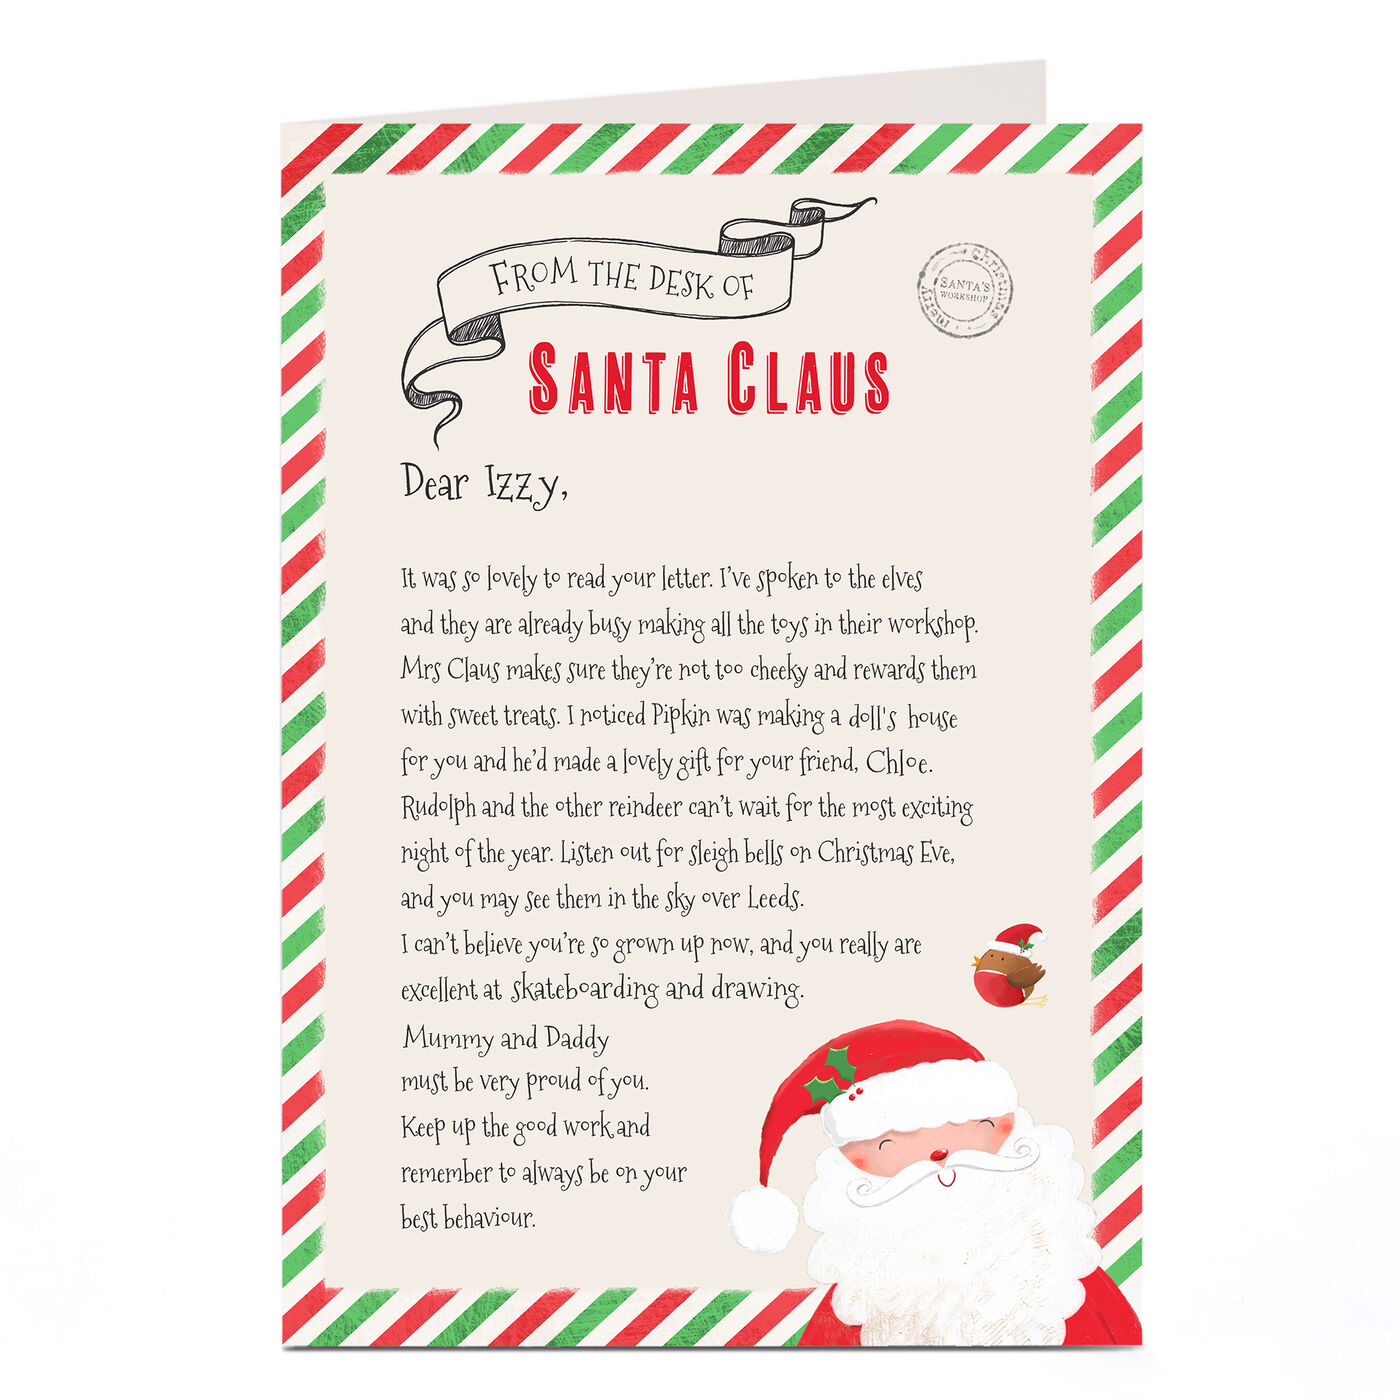 Buy Personalised Letter From Santa - Desk of Santa Claus for GBP 1.79 ...